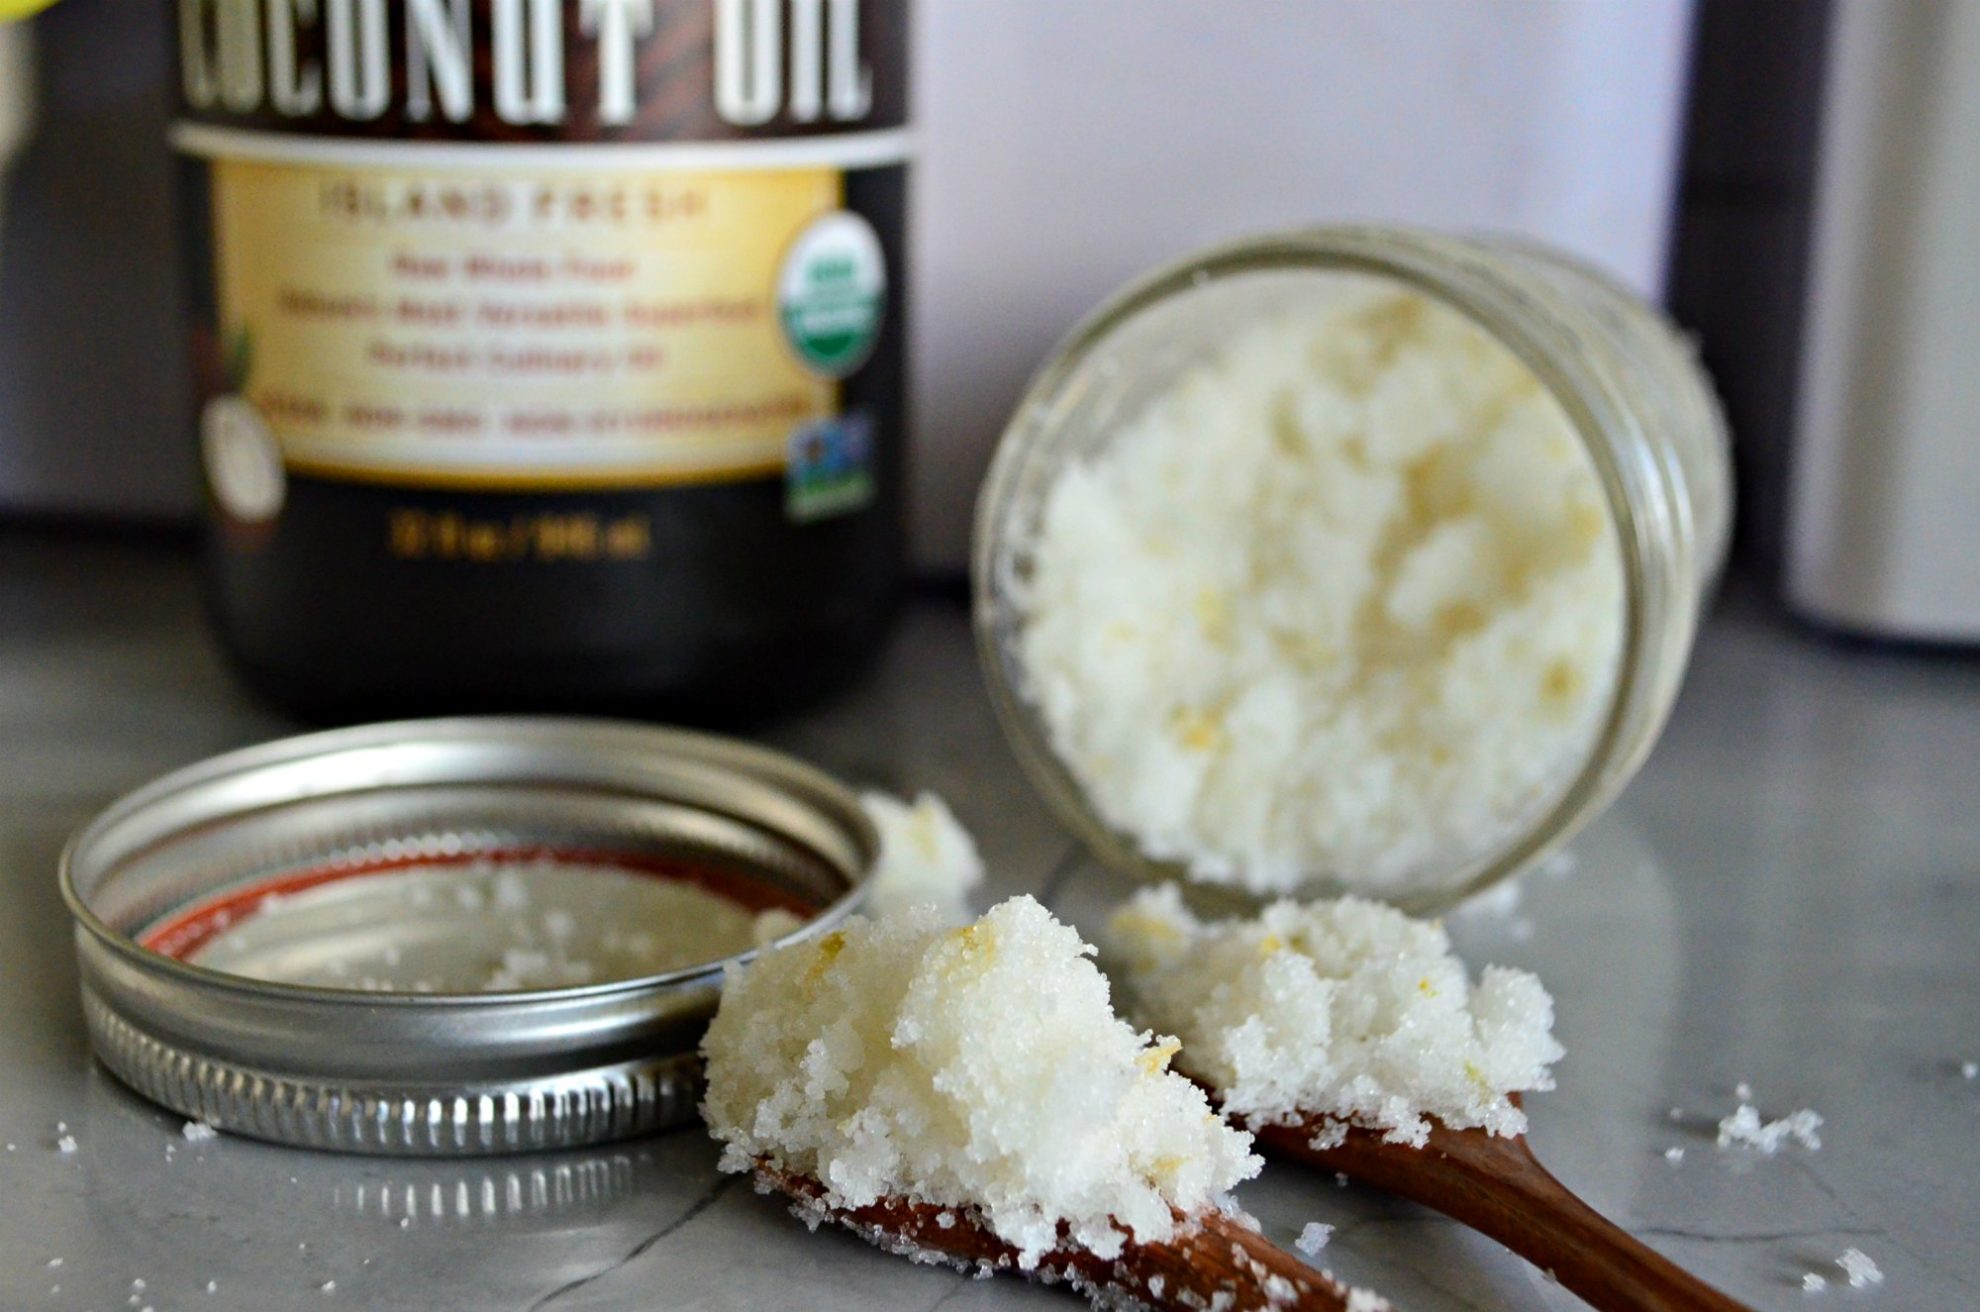 Glass jar on the side with sugar scrub coming out of it with sugar scrub on two wooden spoons on a countertop.